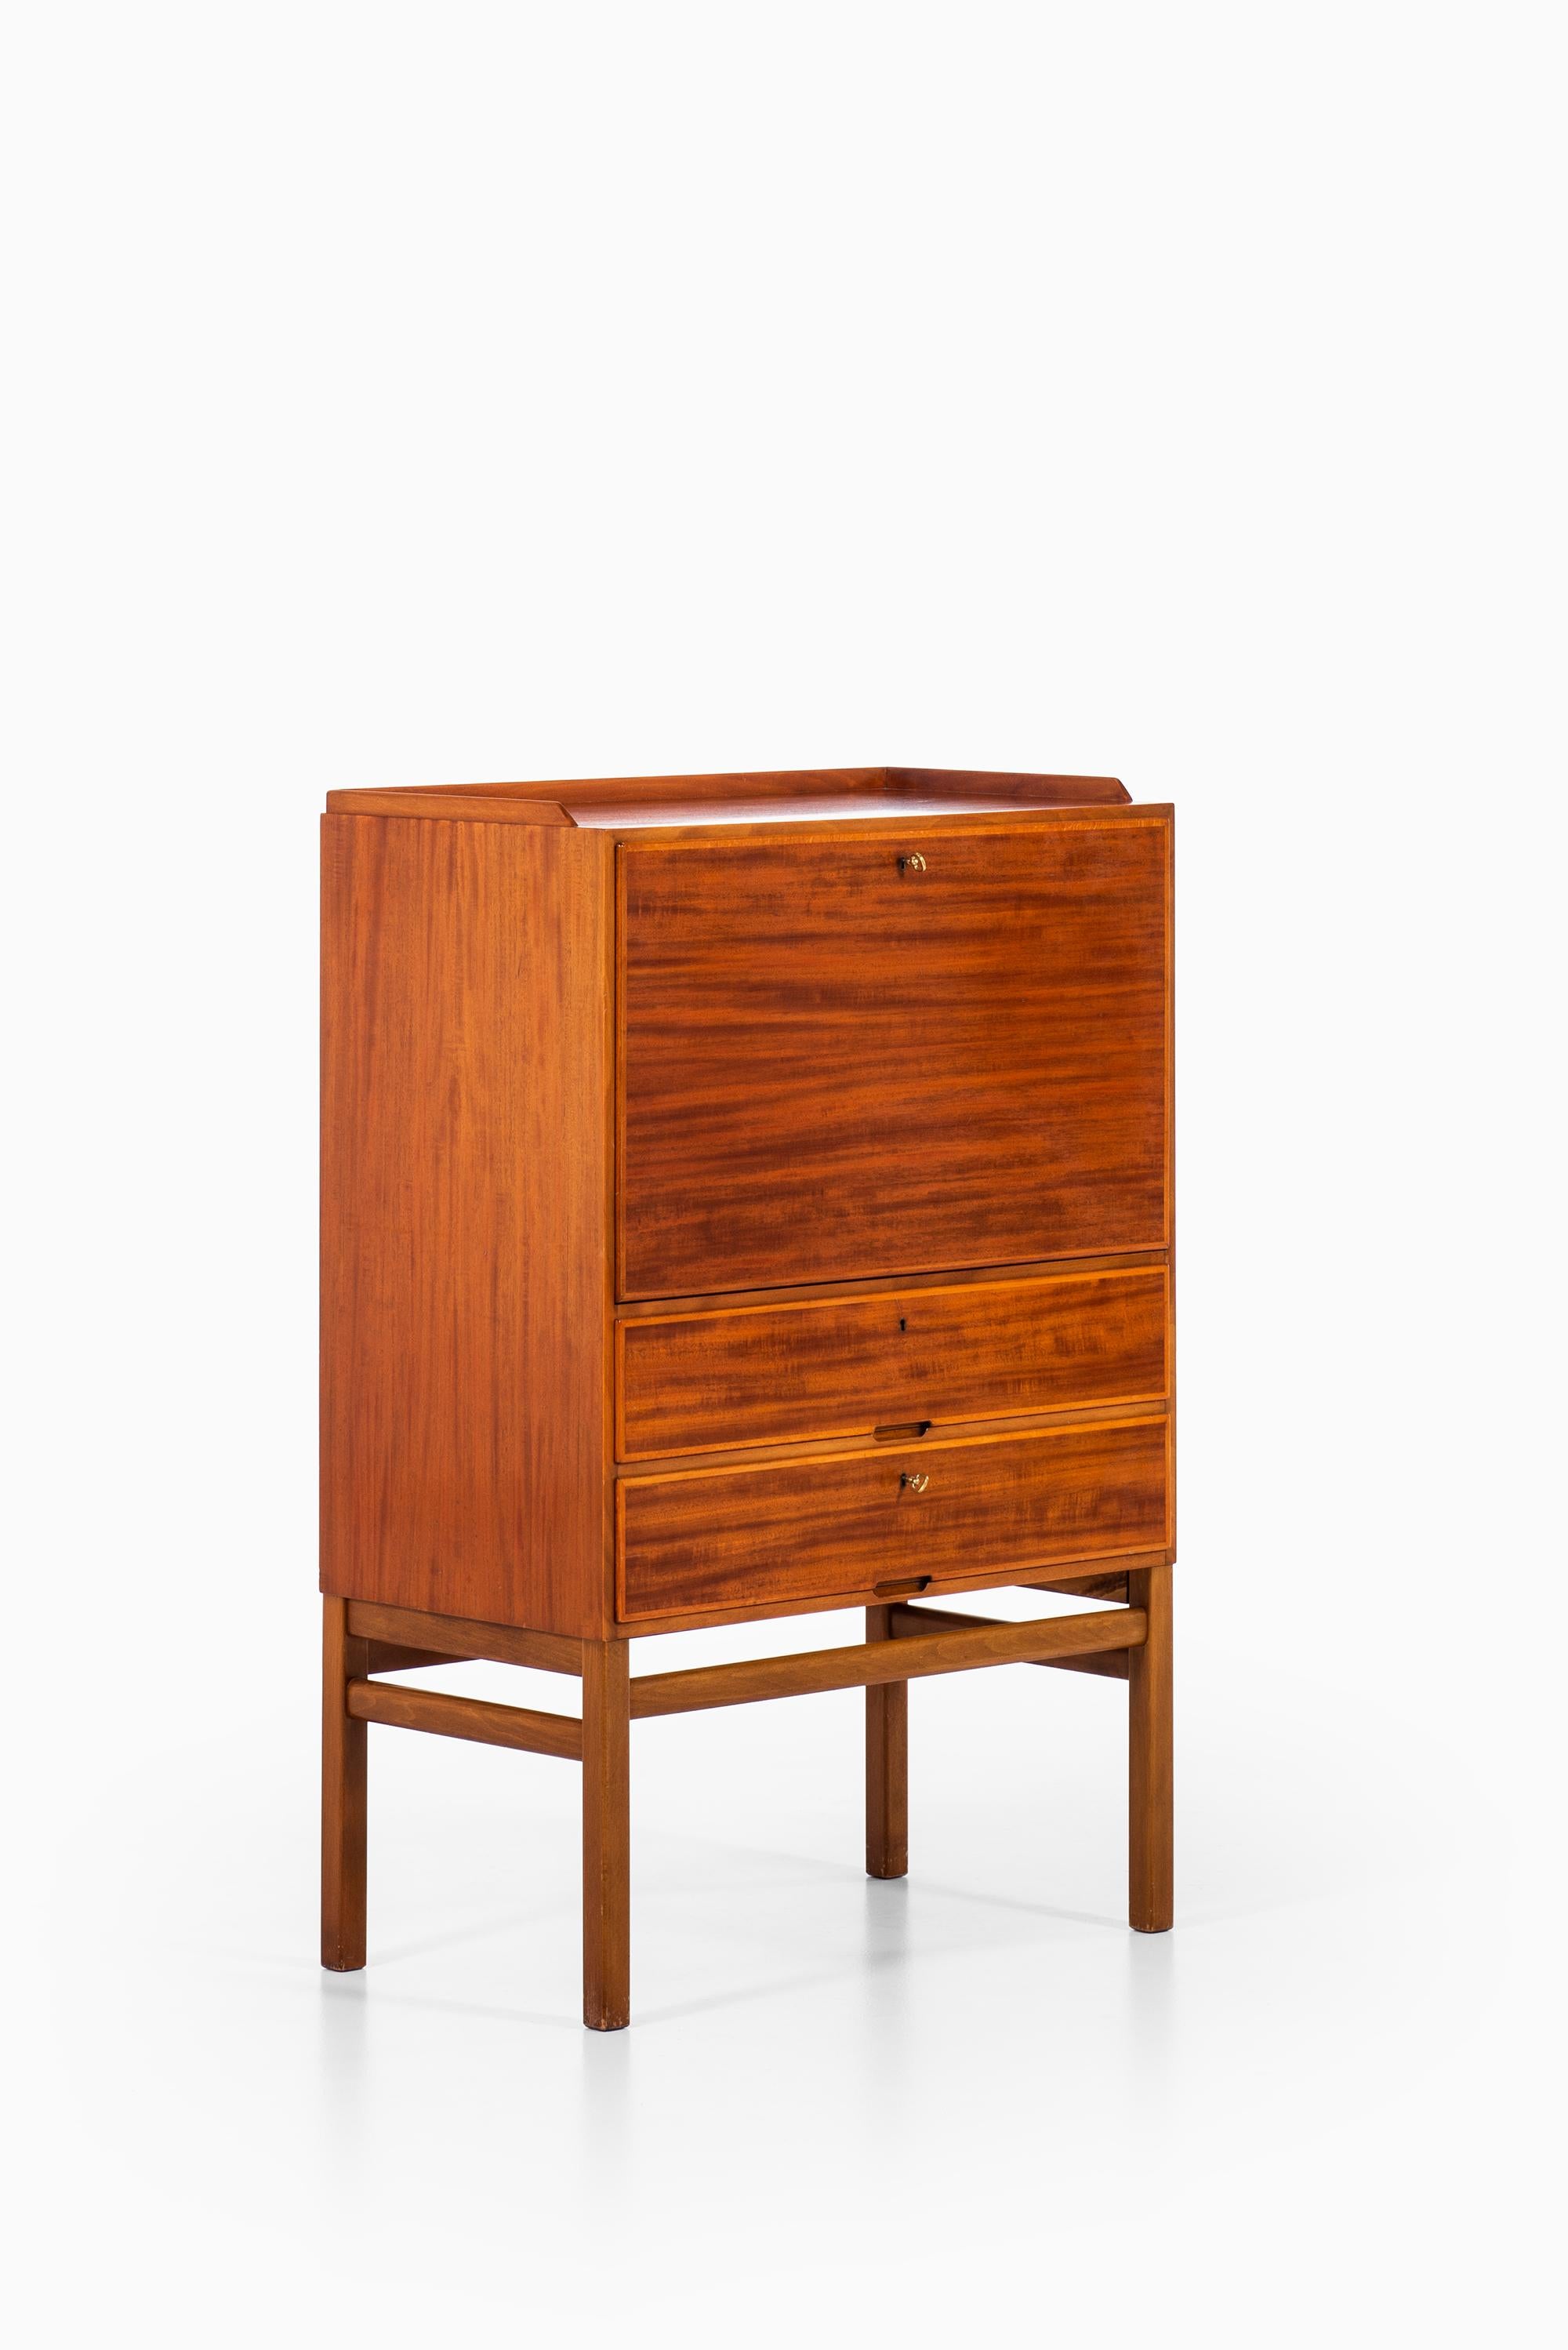 Axel Larsson Cabinet Produced by Bodafors in Sweden 2